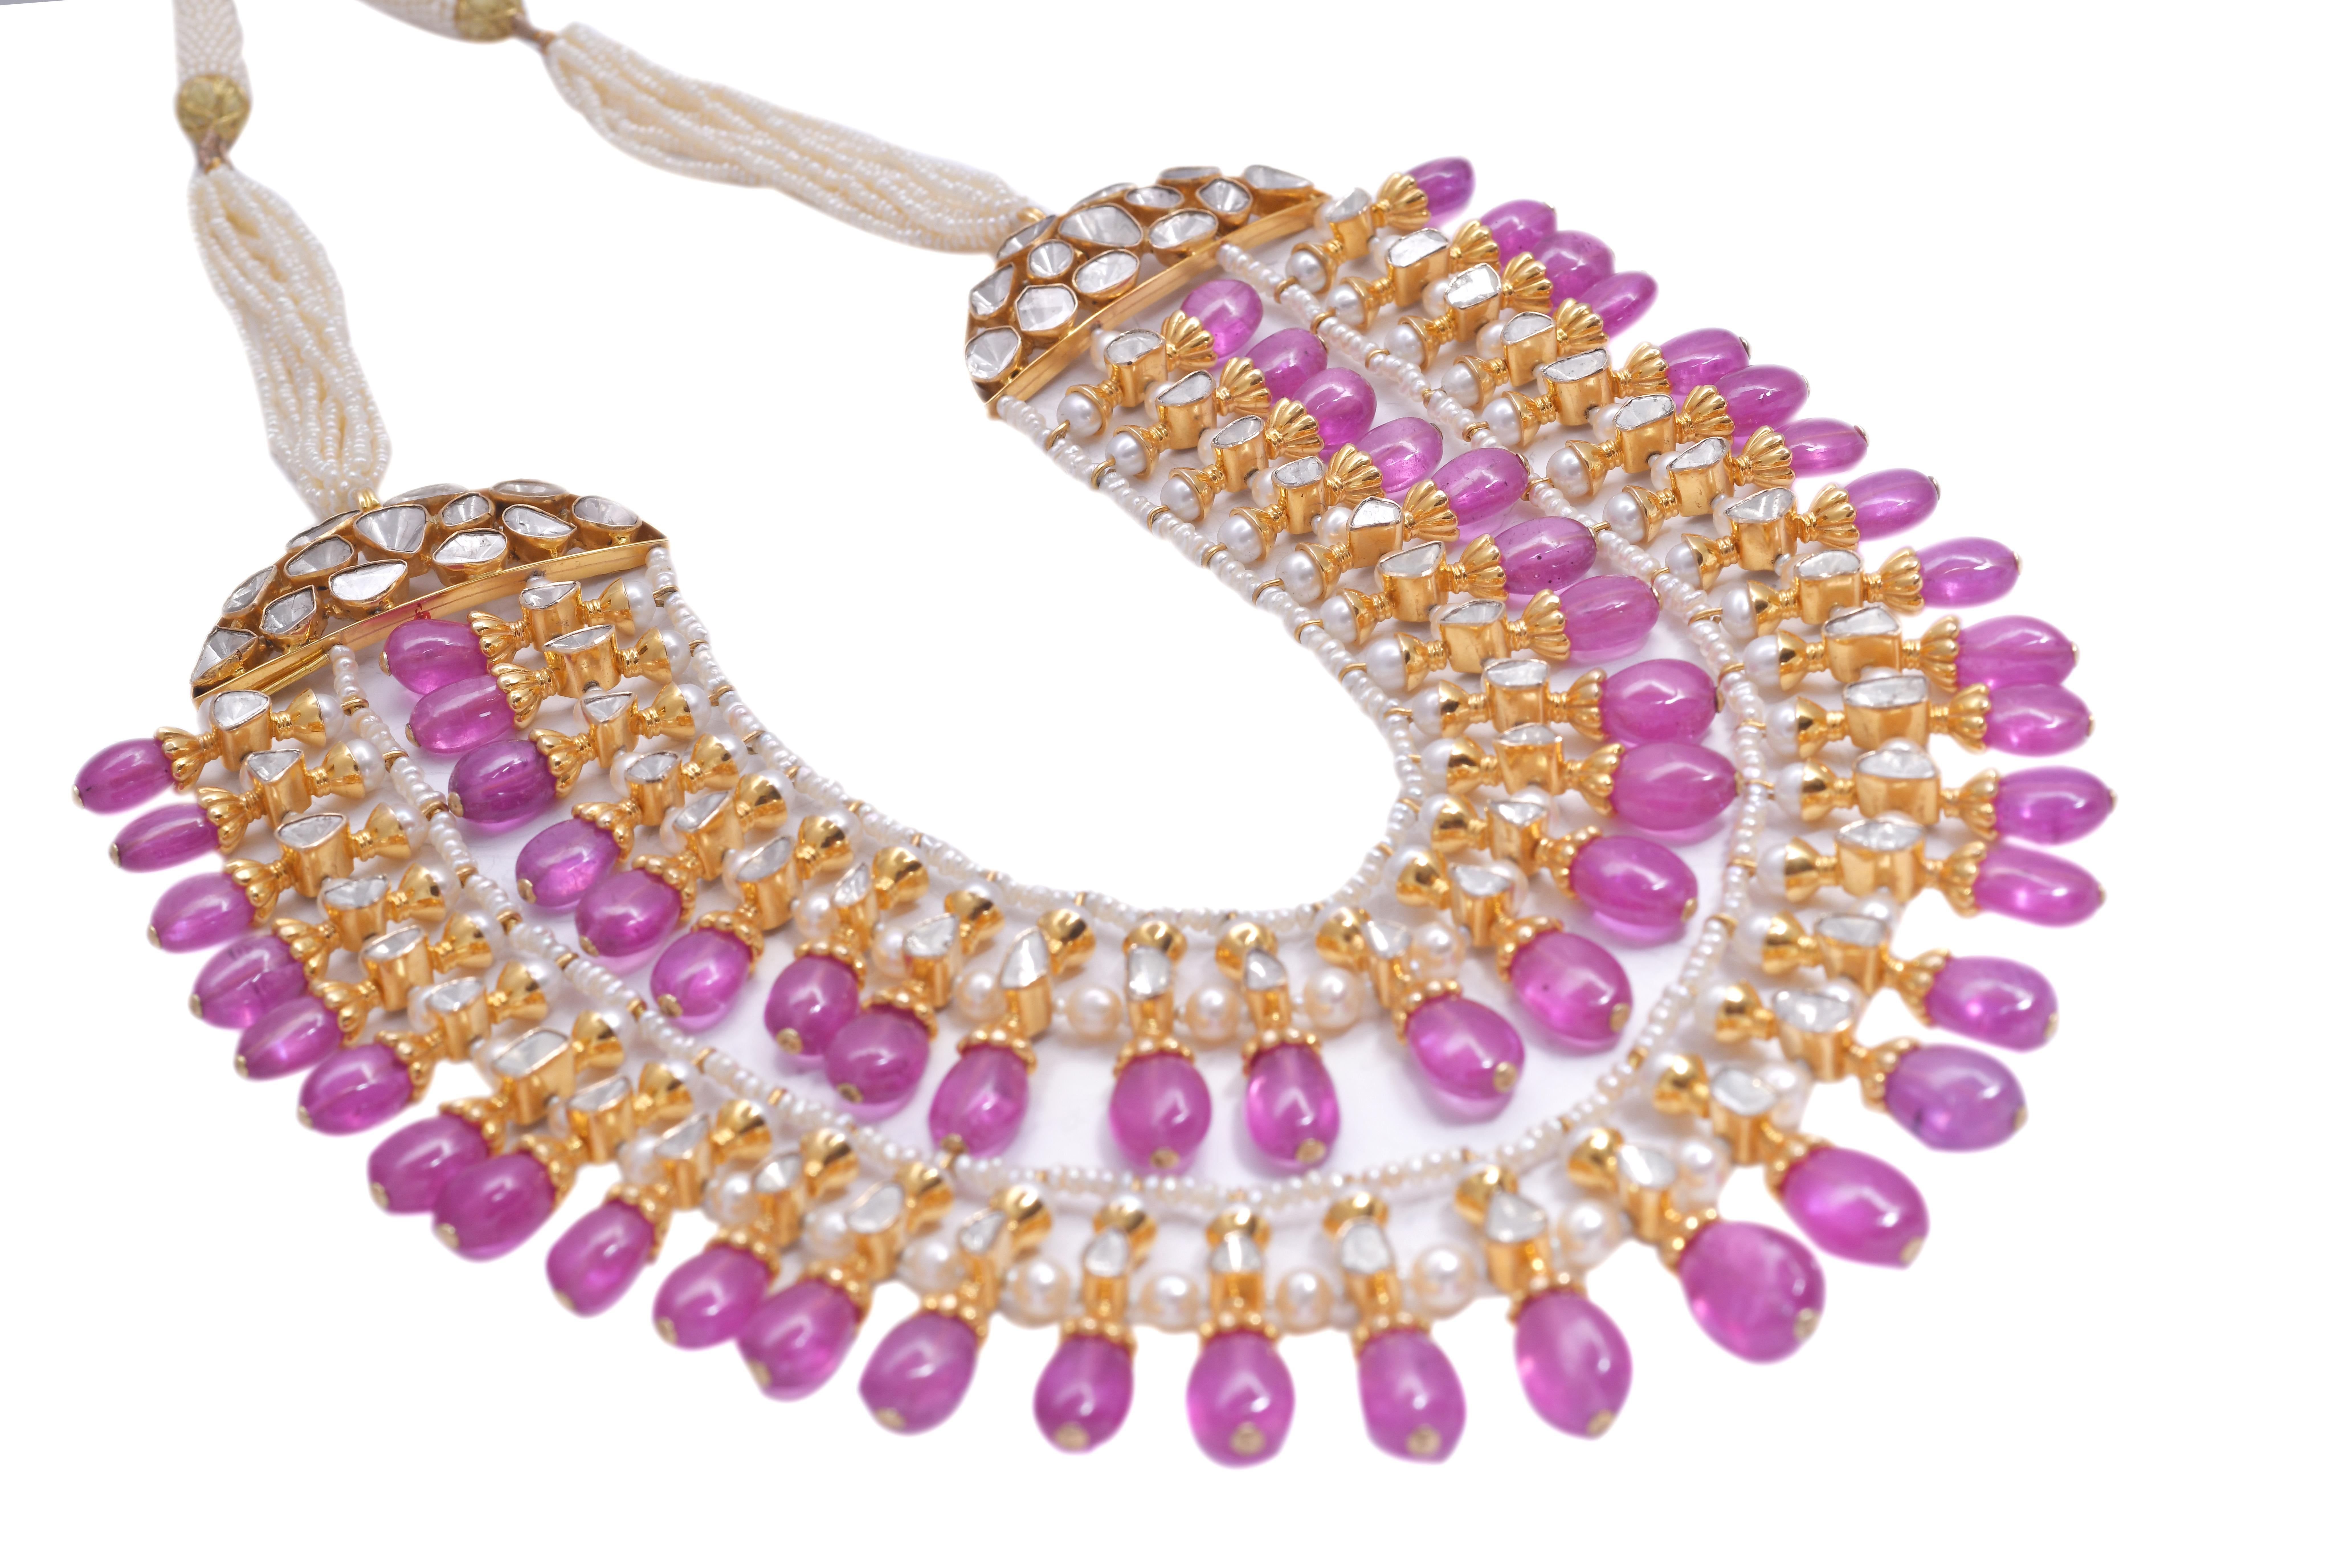  Gold nw 128.840gm 18k necklace
polki 11.05cts
pinksapphire 342.91cts
pearl 137.45cts